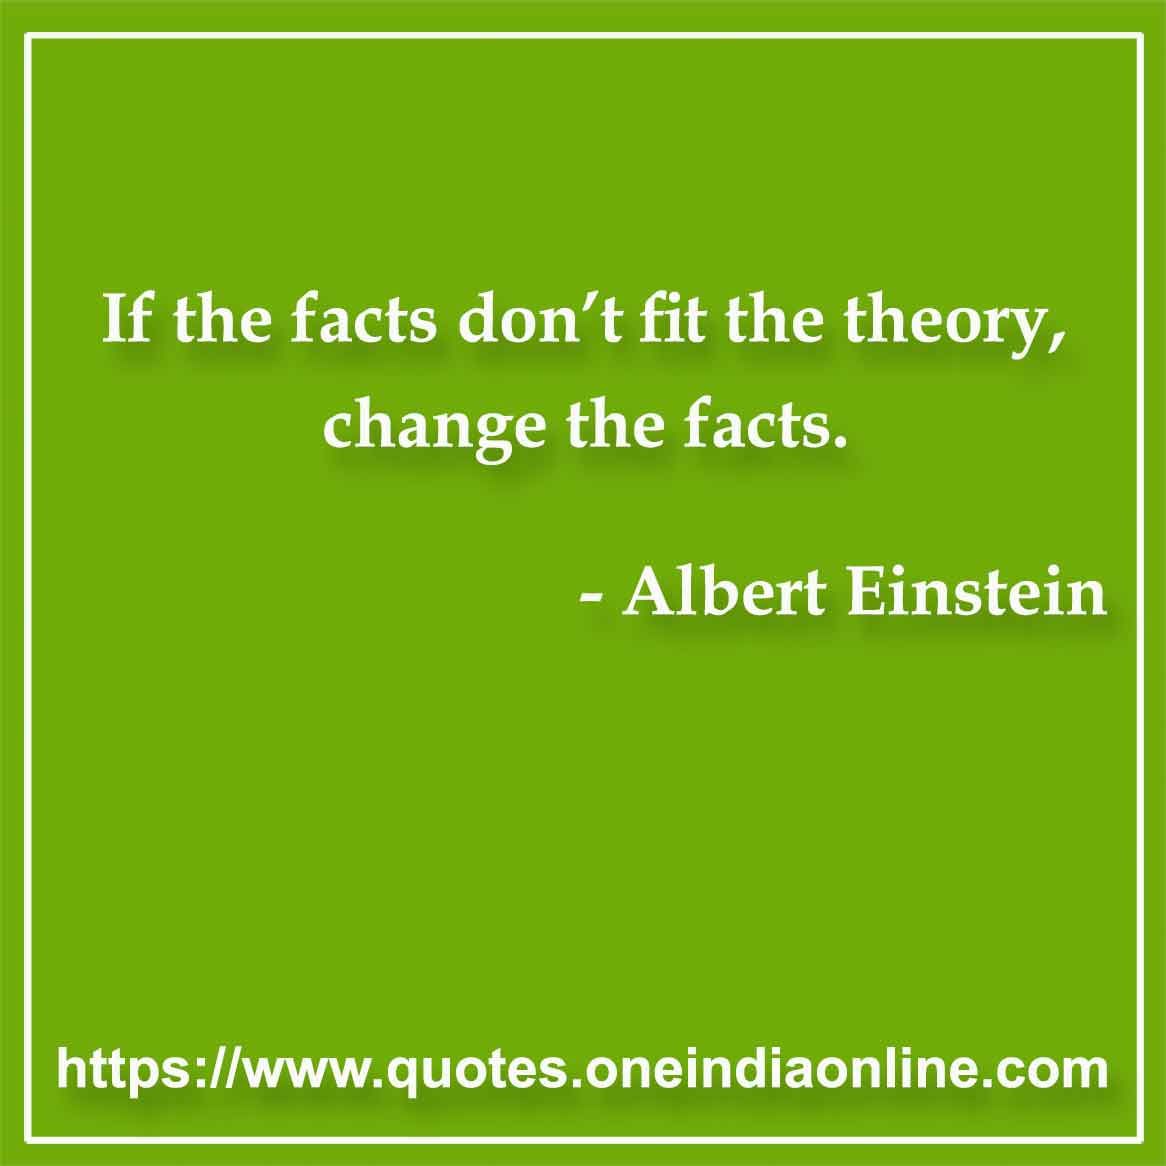 If the facts don’t fit the theory, change the facts.